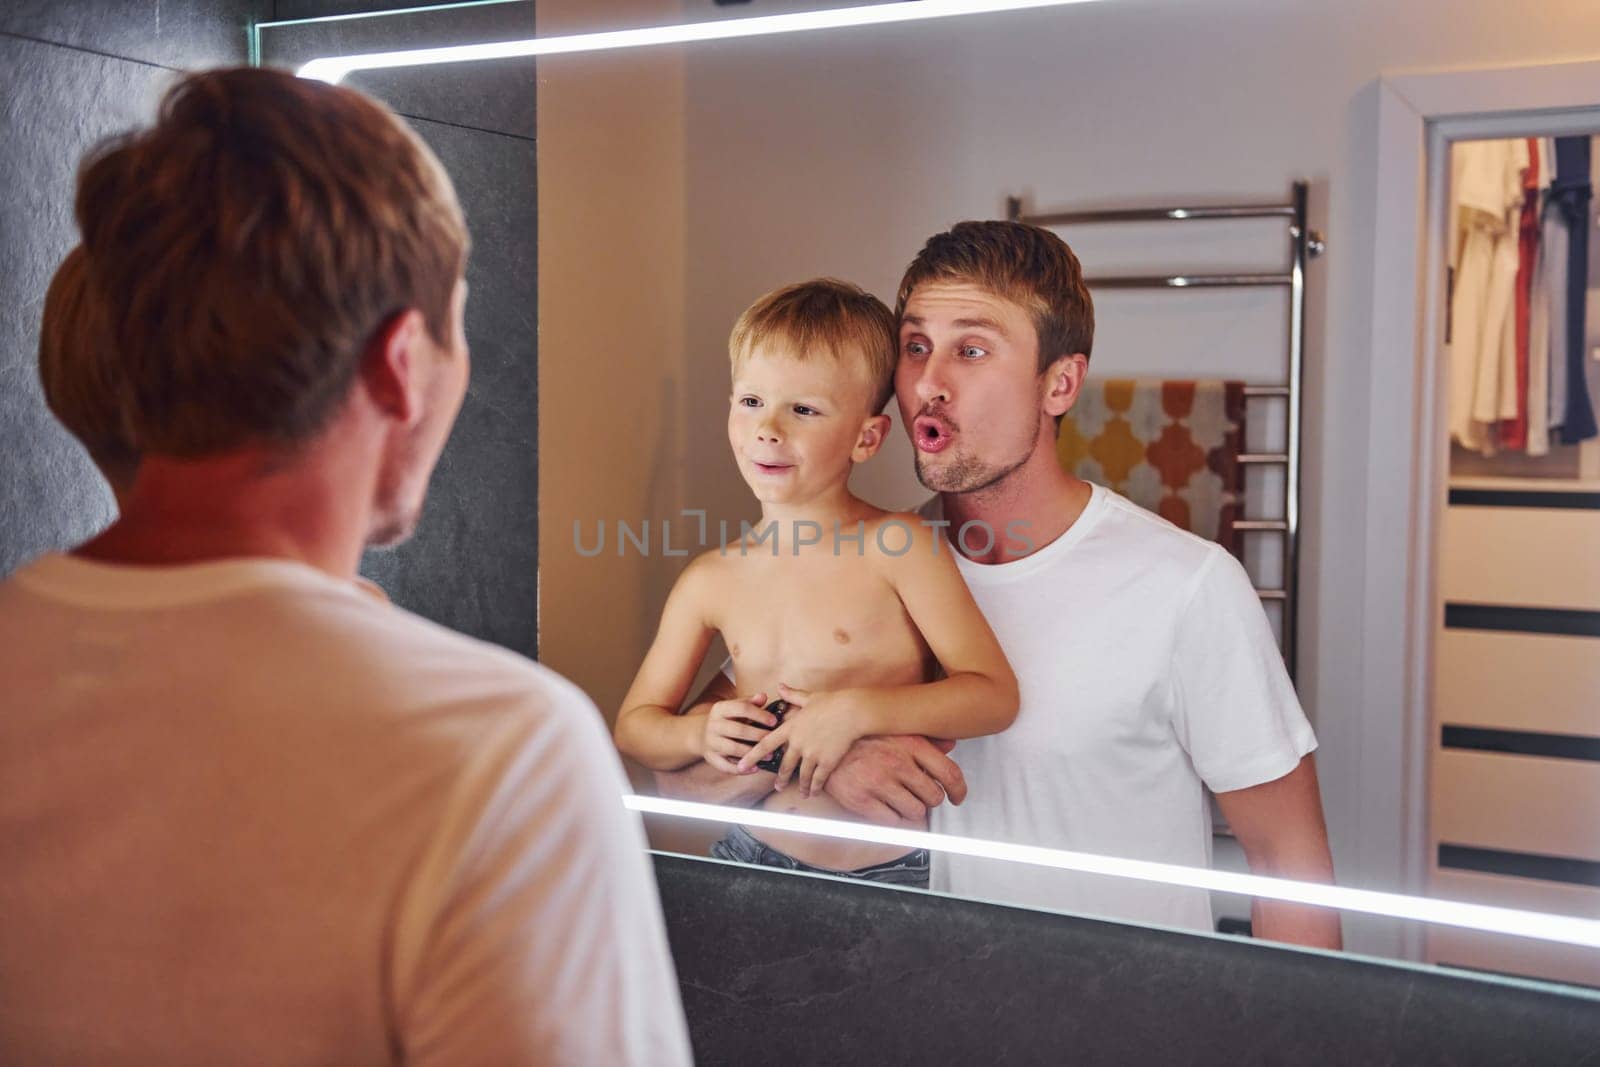 Looking in the mirror in bathroom. Father and son is indoors at home together.